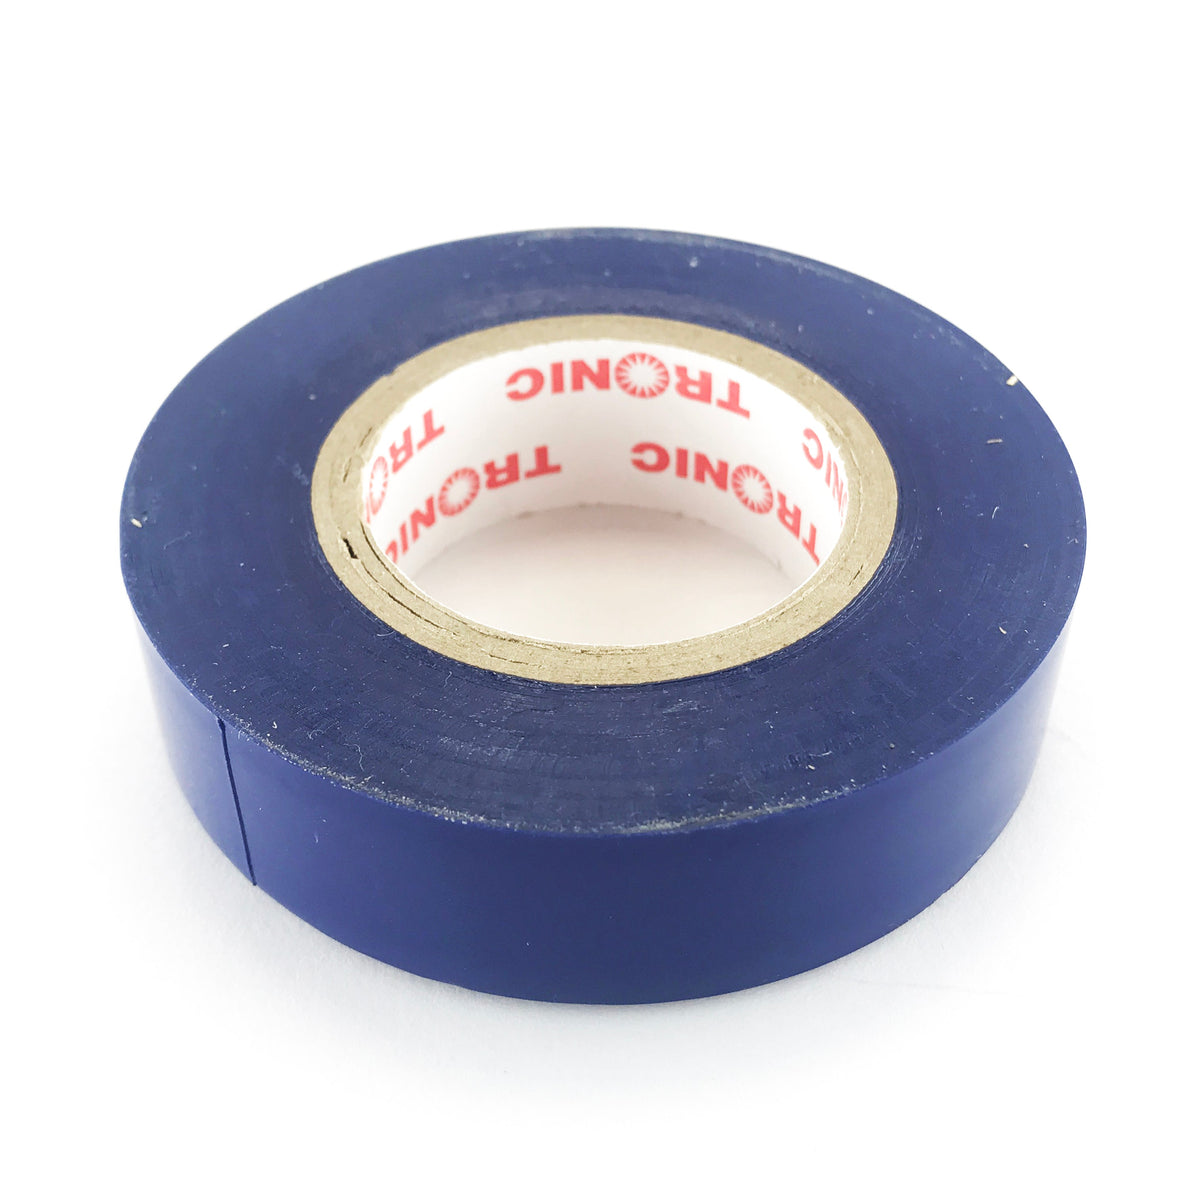 INSULATION TAPE SELF-ADHESIVE 2 WIDE X 30 FT - 4219-12, Beverage  Equipment, Parts Distributor - Apex Beverage Equipment - Tapes - Tapes